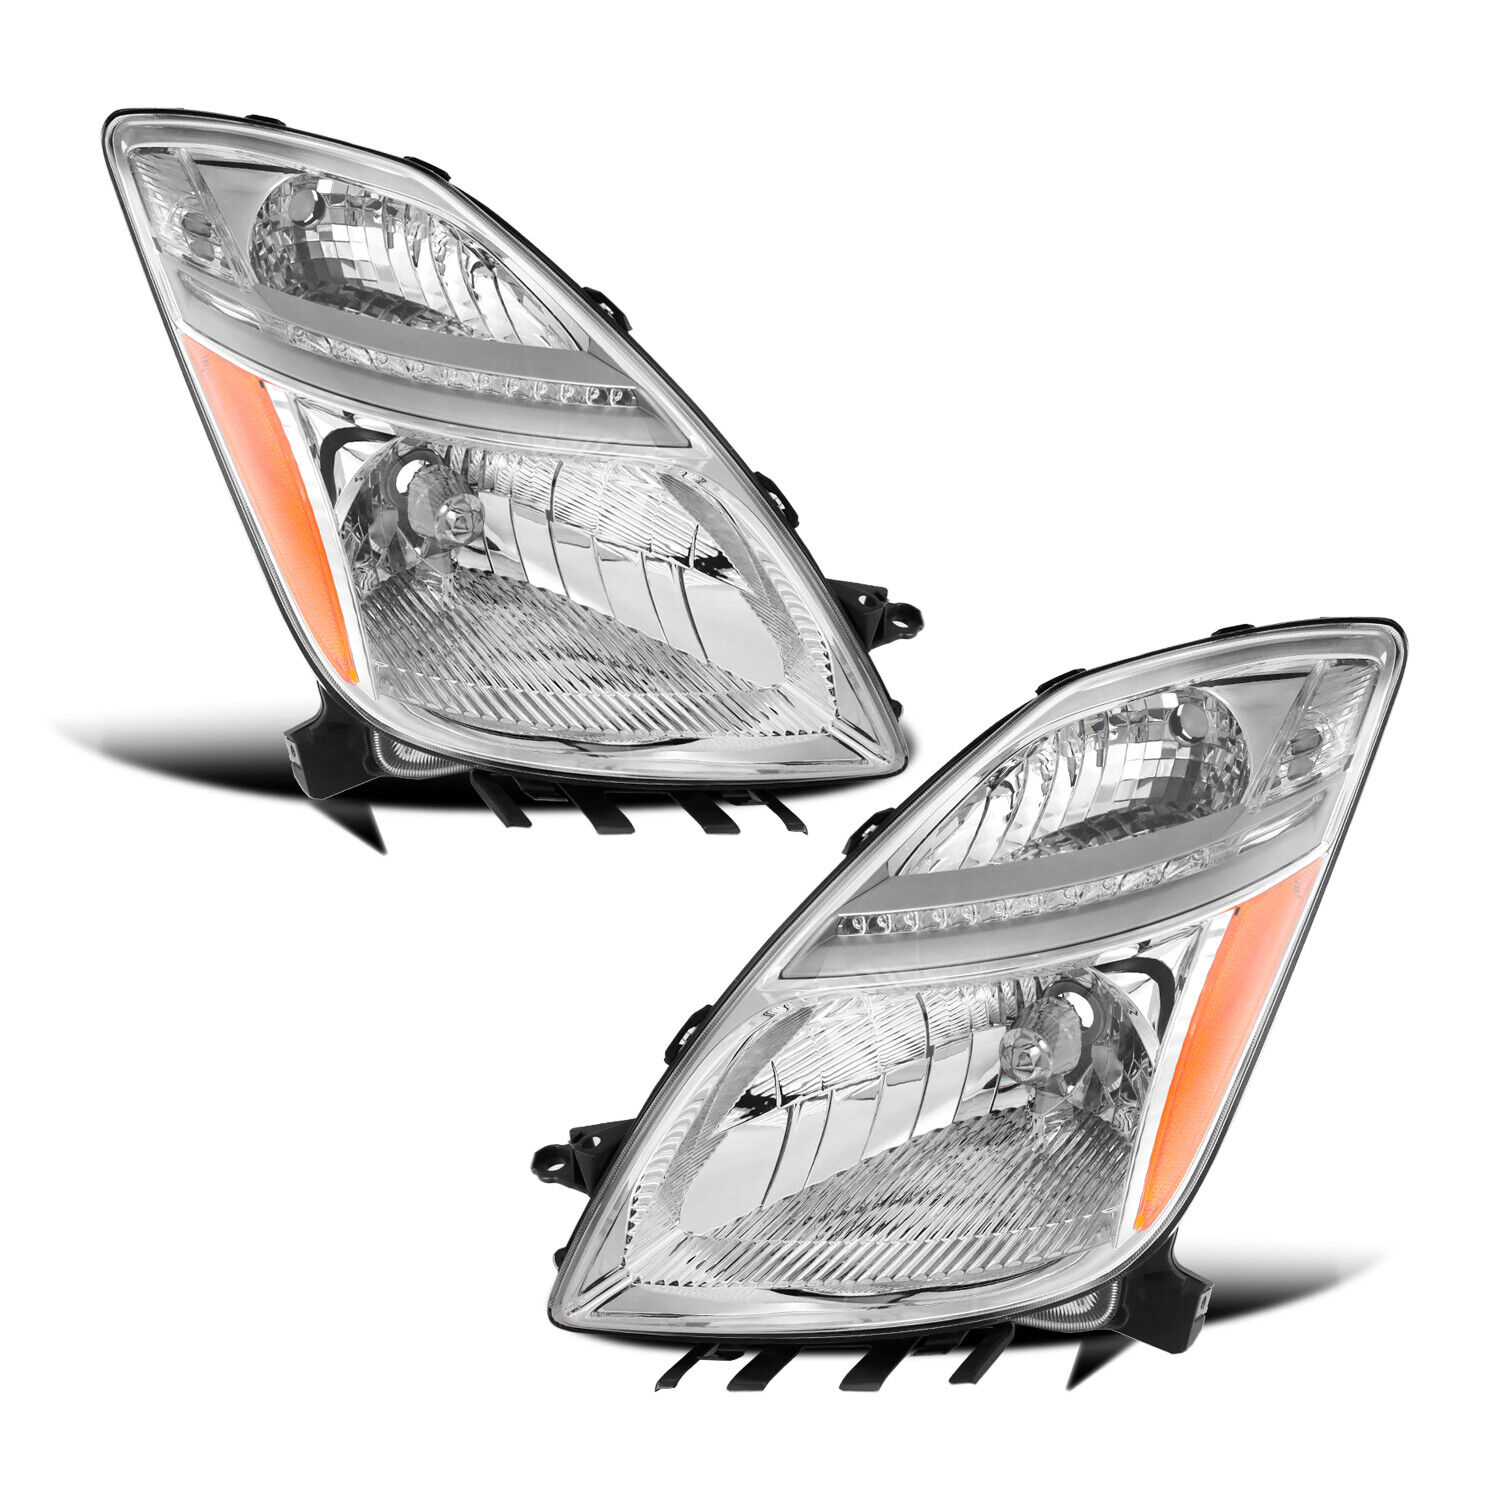 For 2006-2009 Toyota Prius Hatchback HID Chrome Headlights Assembly Lamps Pair